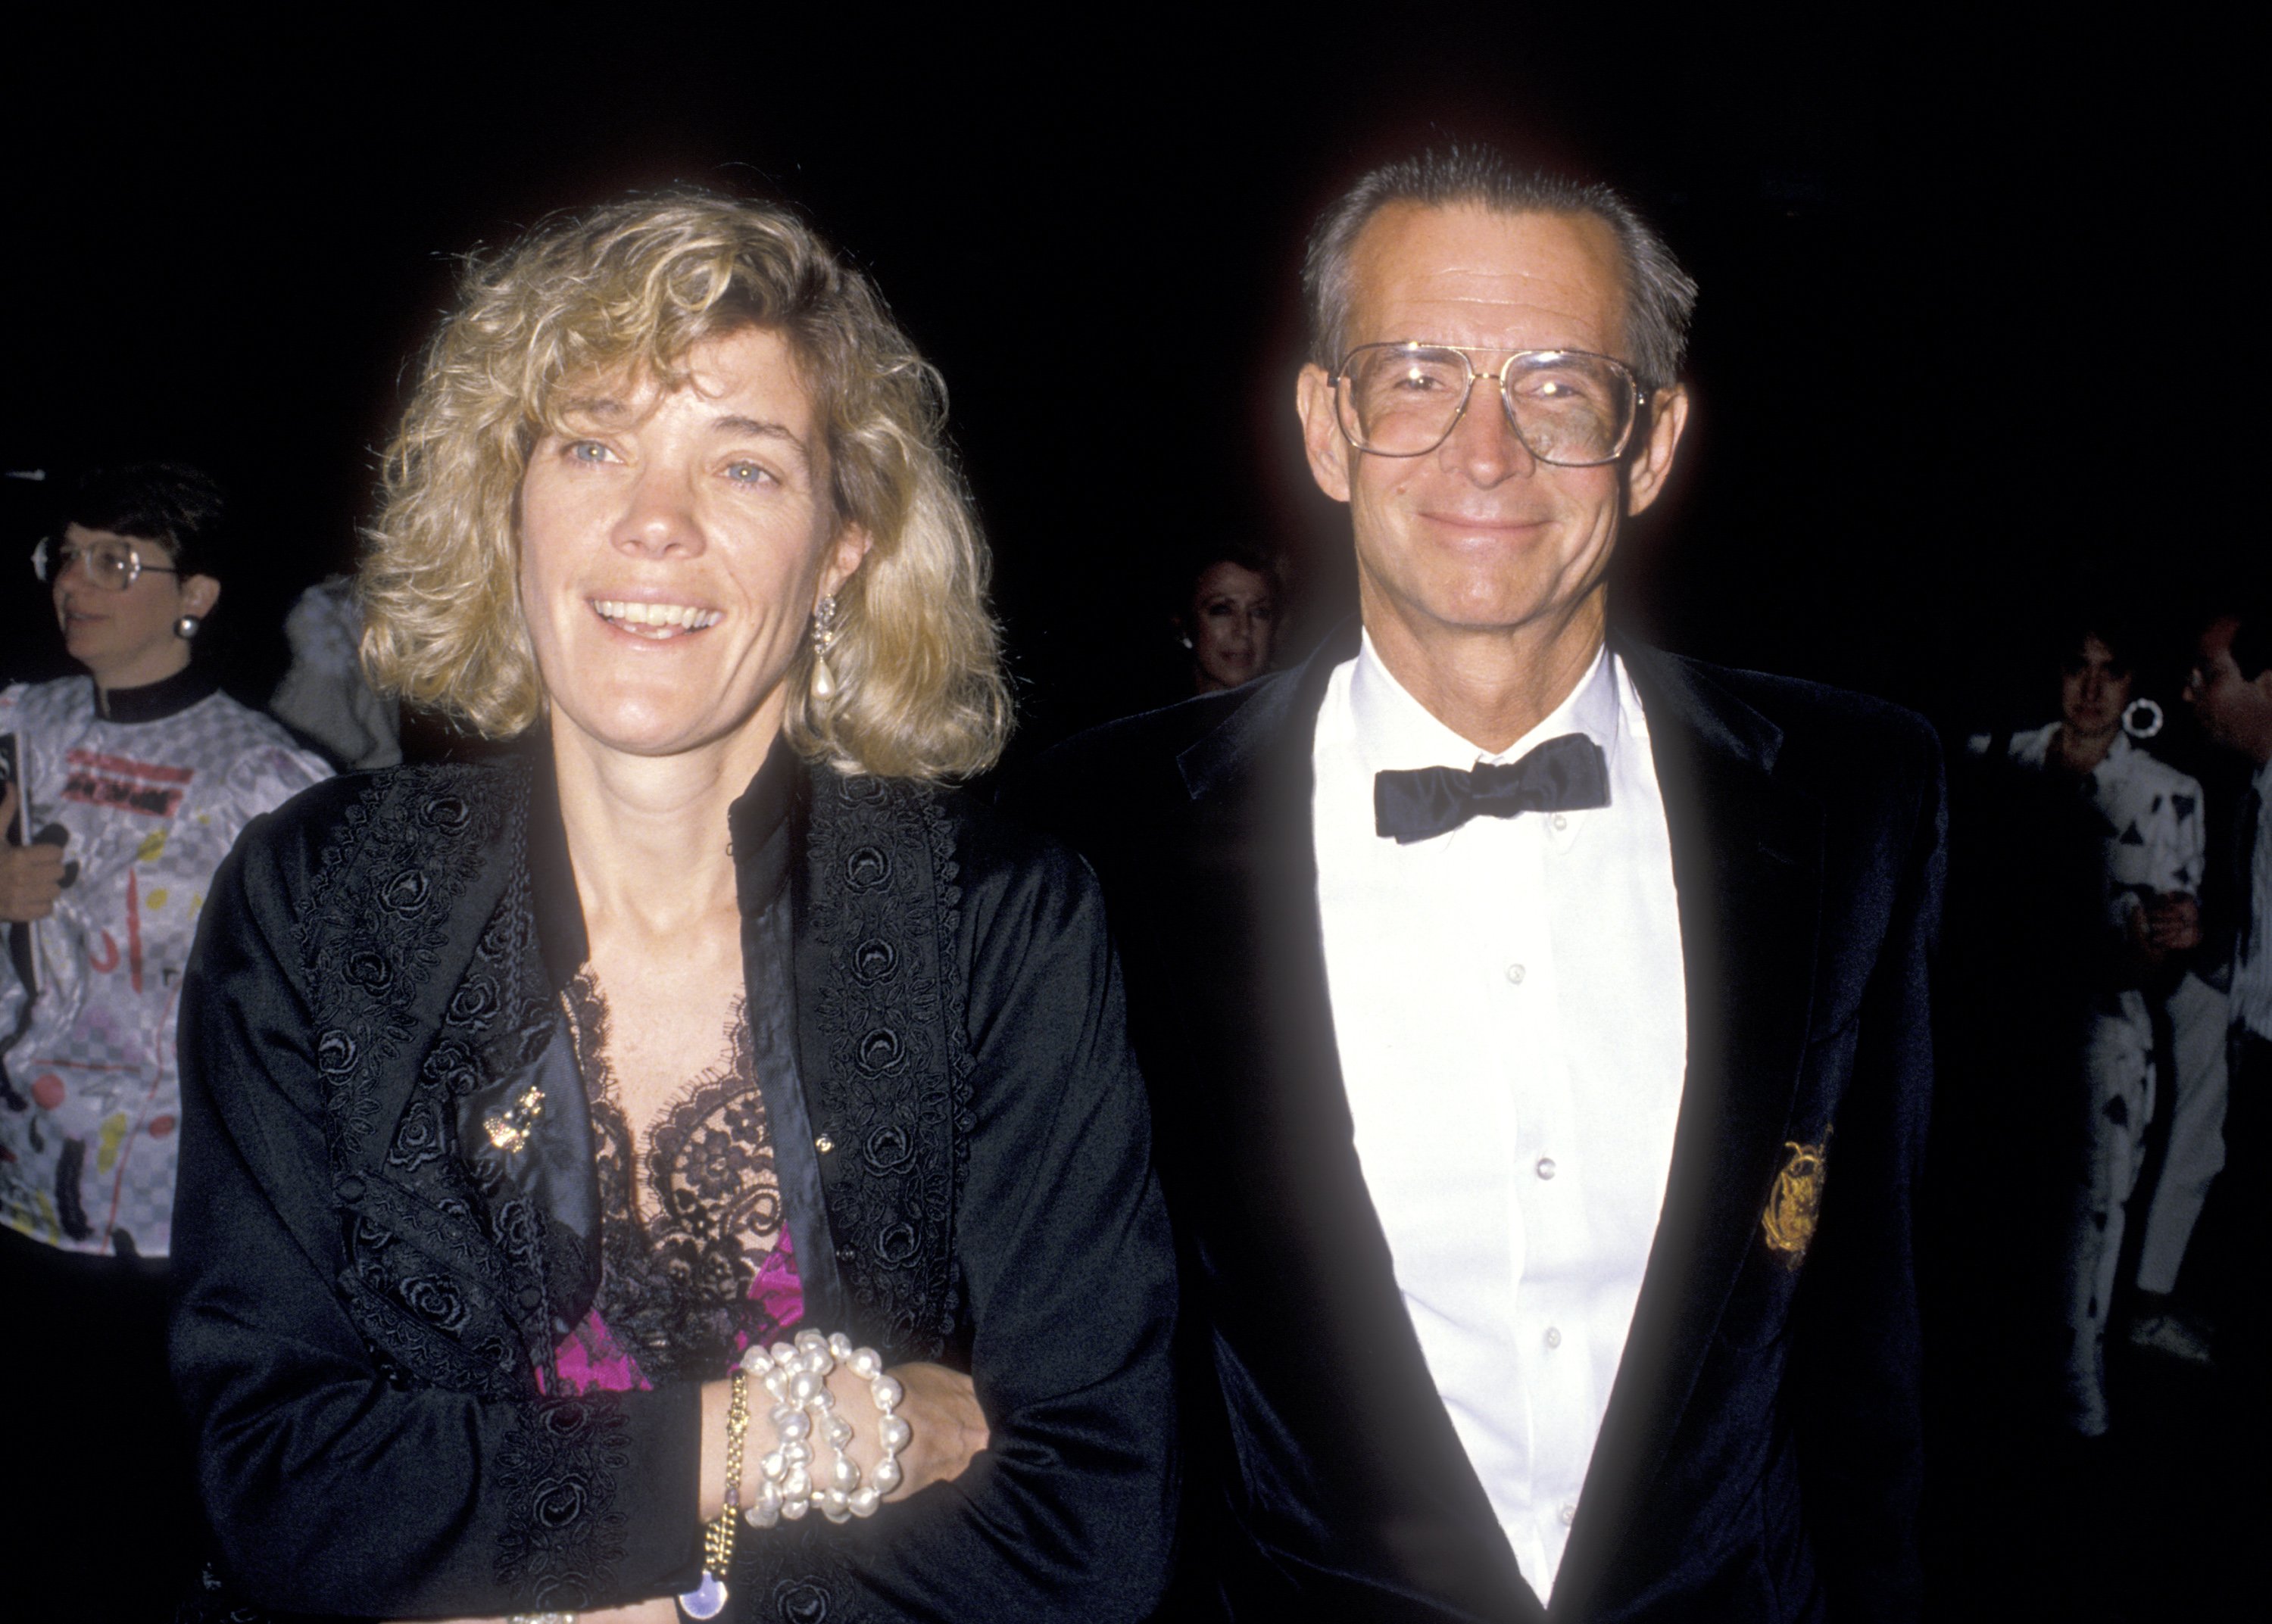 Anthony Perkins and his wife Berry Berenson attend "The Phantom of the Opera" Opening Night Performance on May 31, 1989 at Ahmanson Theatre, Los Angeles Music Center in Los Angeles, California | Photo: Getty Images